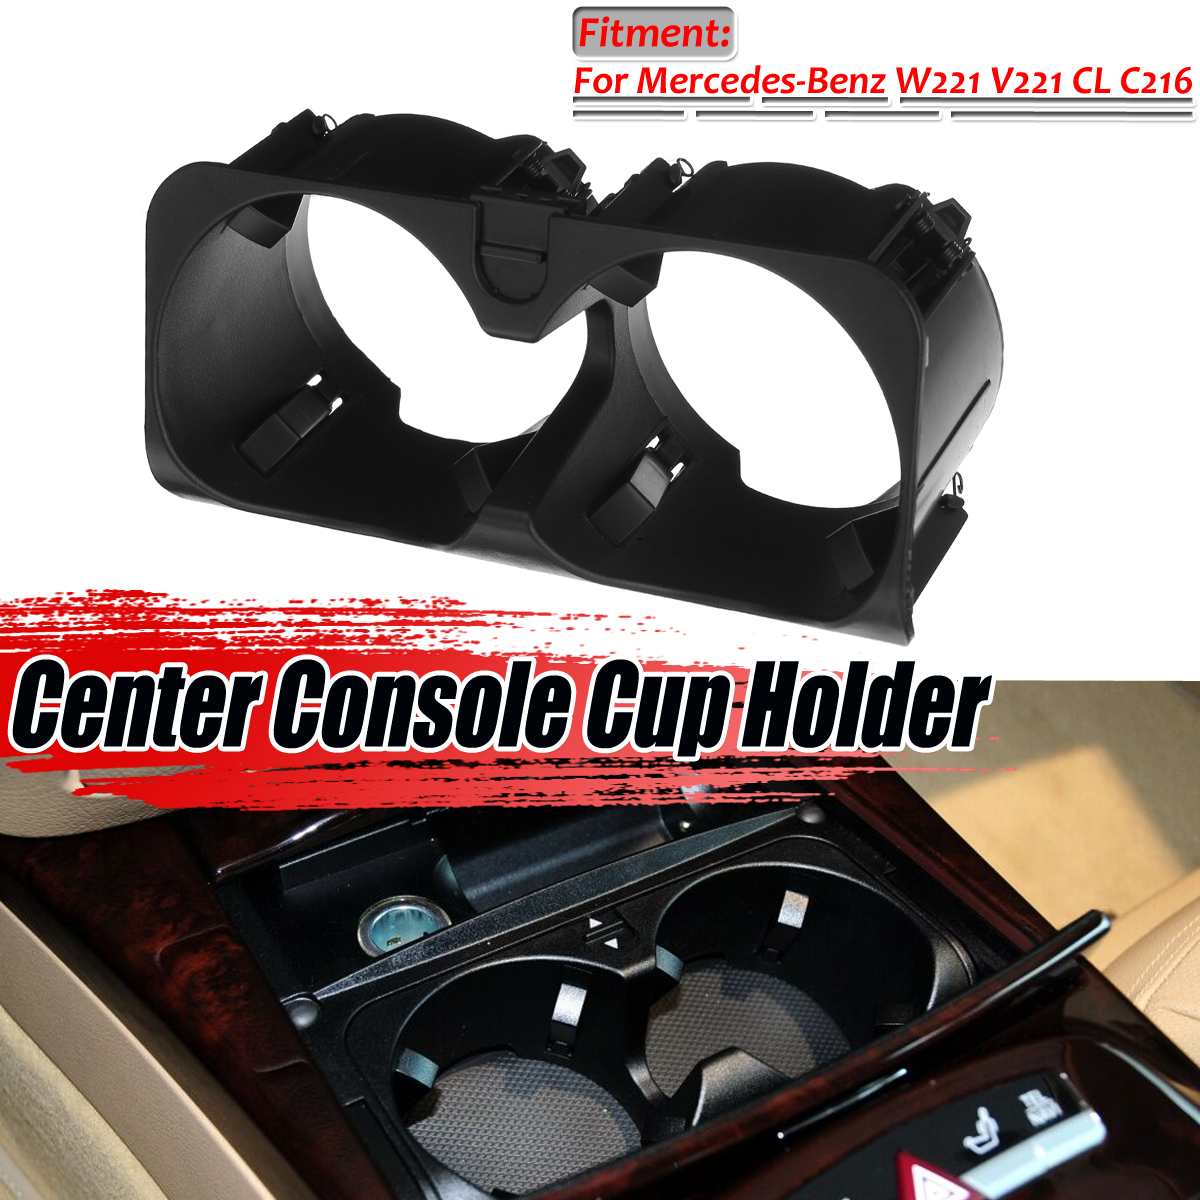 W221 Auto Center Console Bekerhouder Cup Bekerhouder Stand Outer Cover Voor Mercedes Forbenz S-Klasse W221 V221 cl C216 A2218130014